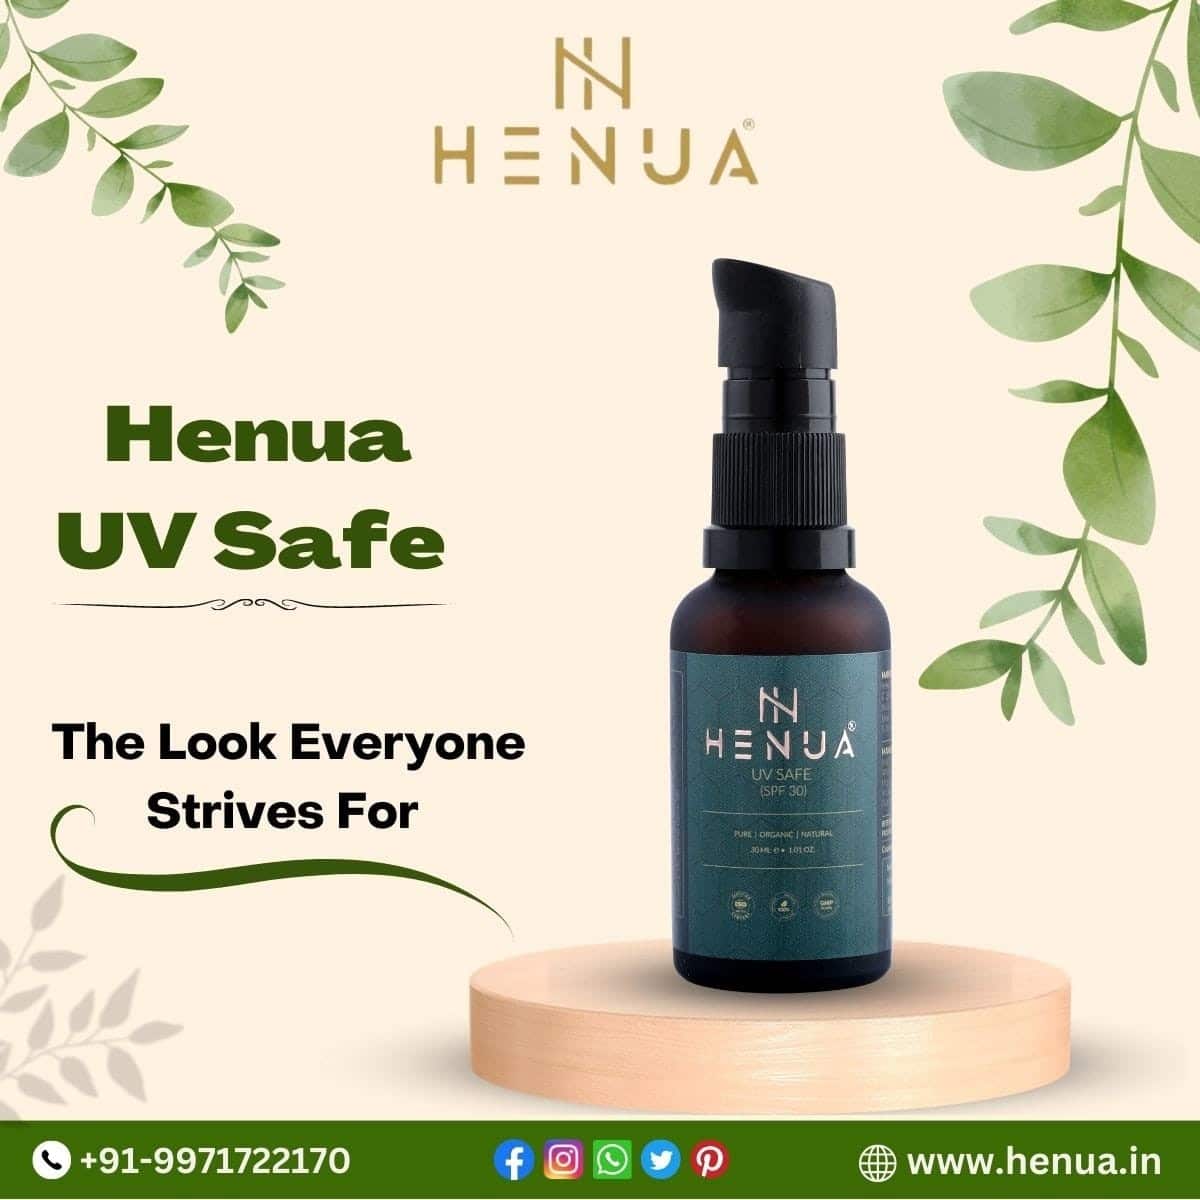 Protect-Your-Skin-With-Protection-Of-Henua-UV-Safe-SPF-30